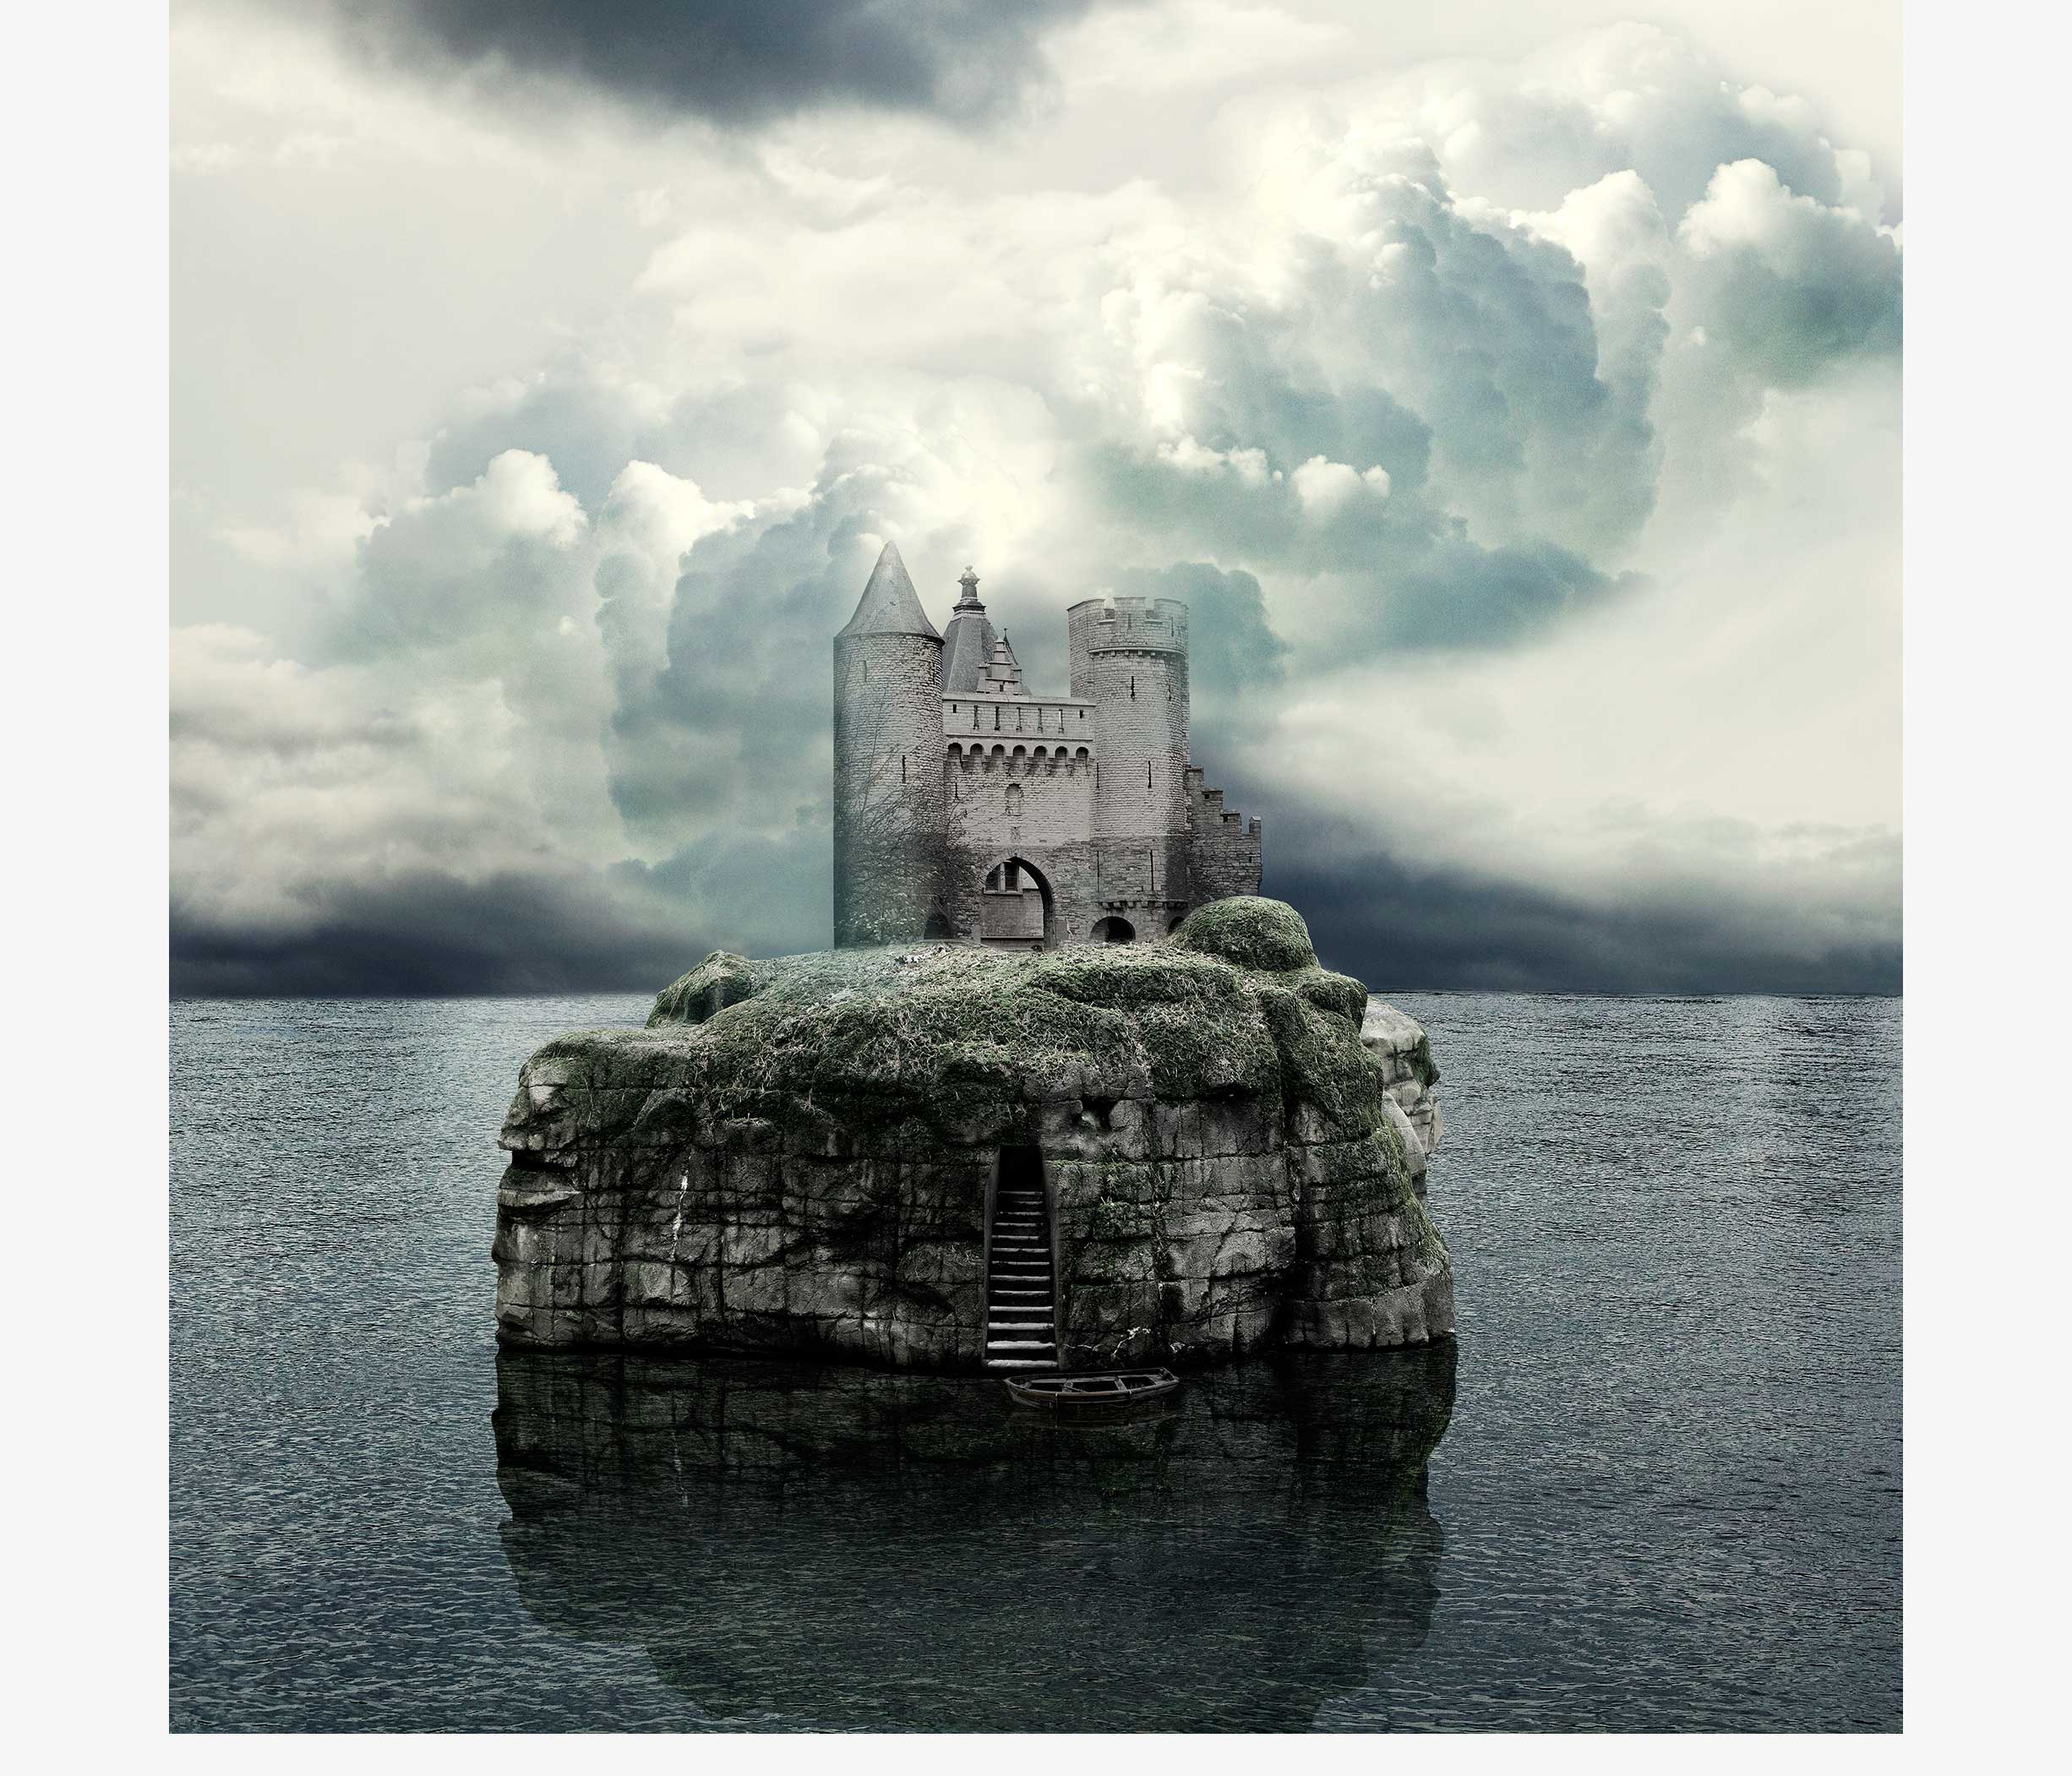 mysterious castle for the odd scenery photo serie